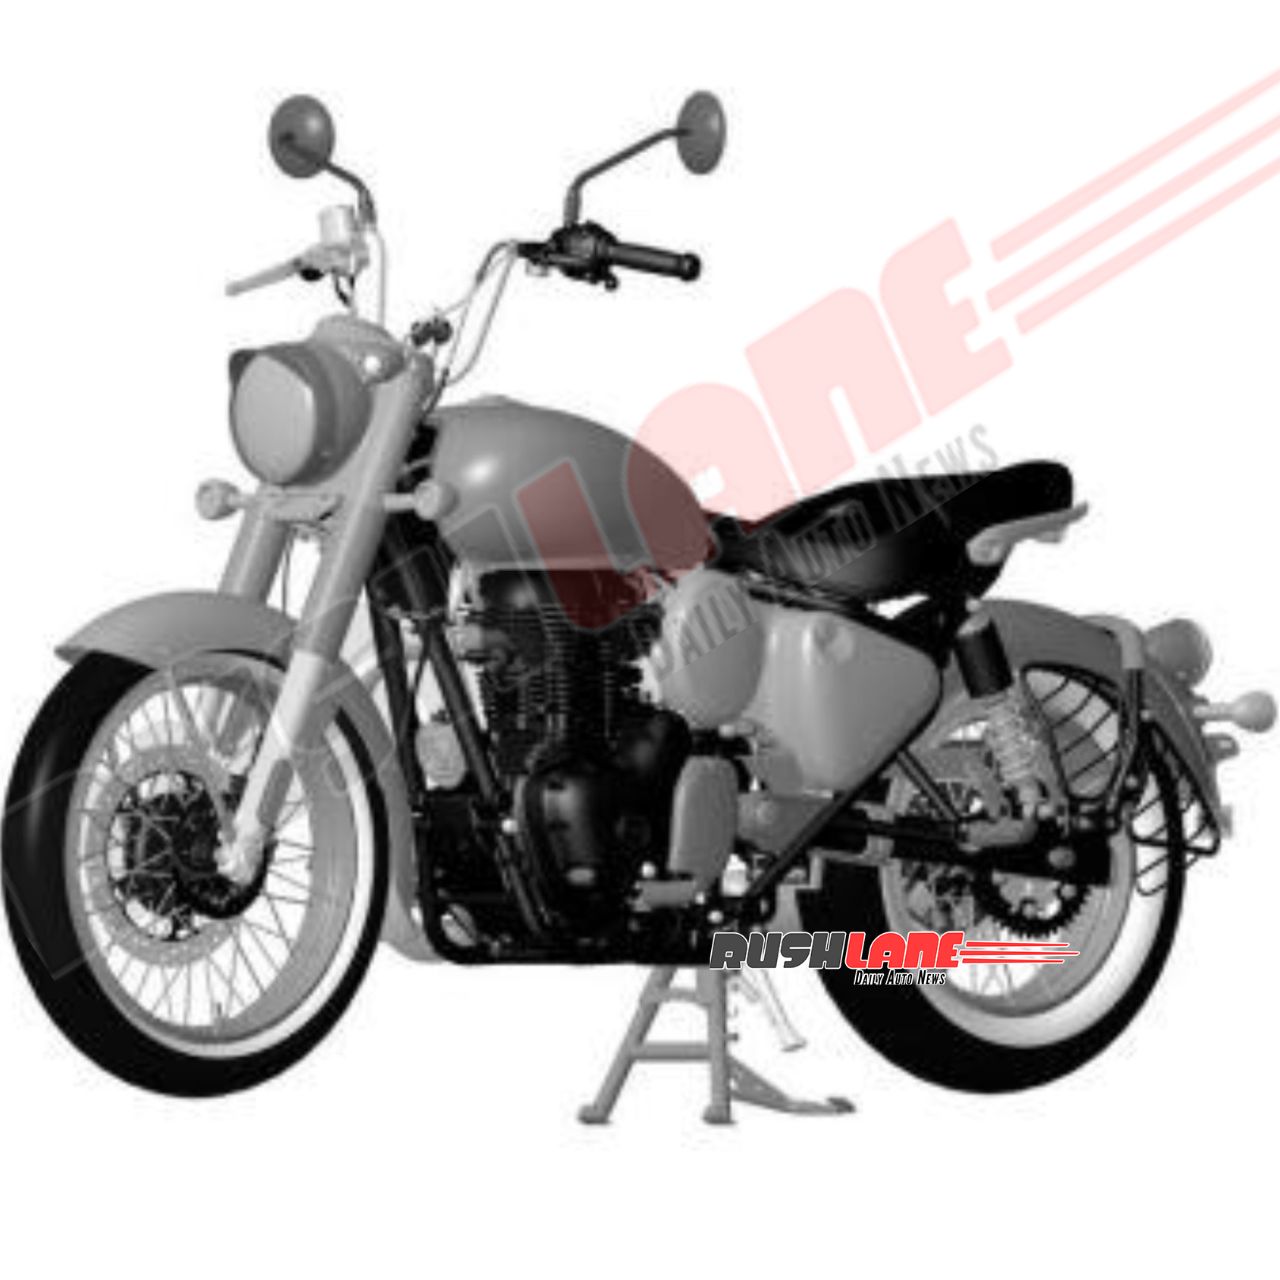 Royal Enfield Classic 350 Bobber Patent Image Leaked